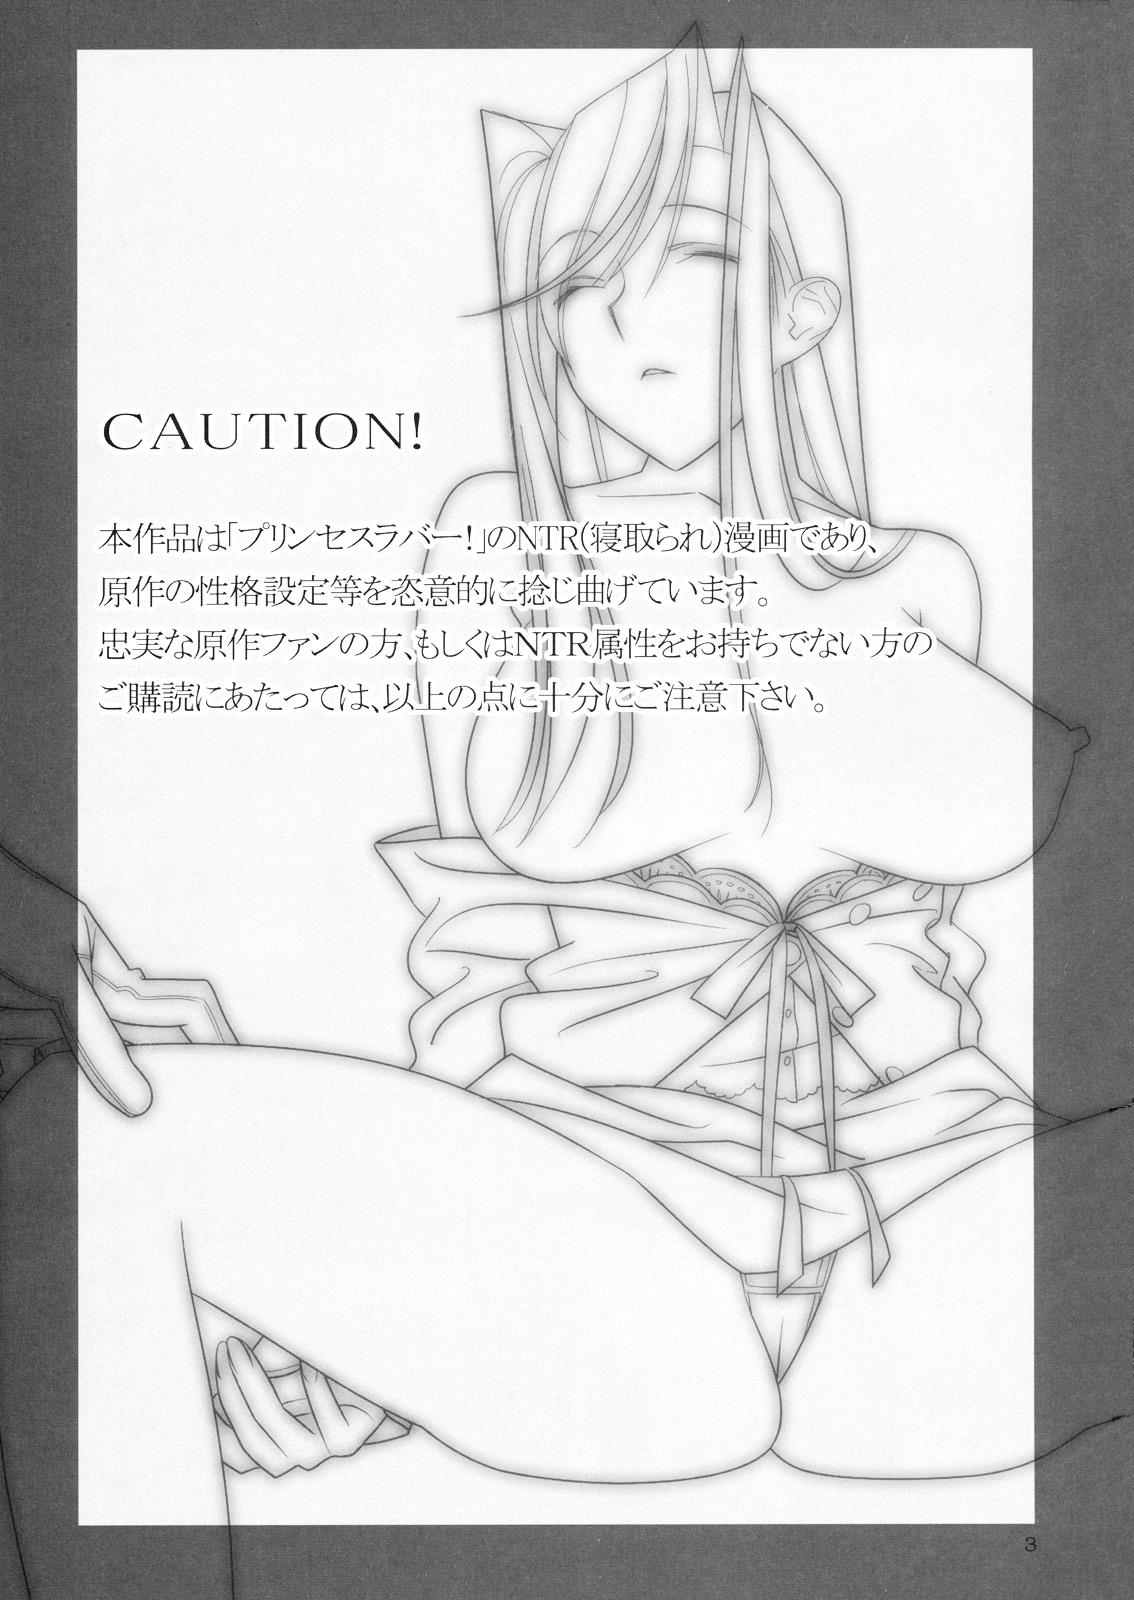 Best Blow Job Ever Admired Beautiful Flower Vol.2 - Princess lover Fuck - Page 2